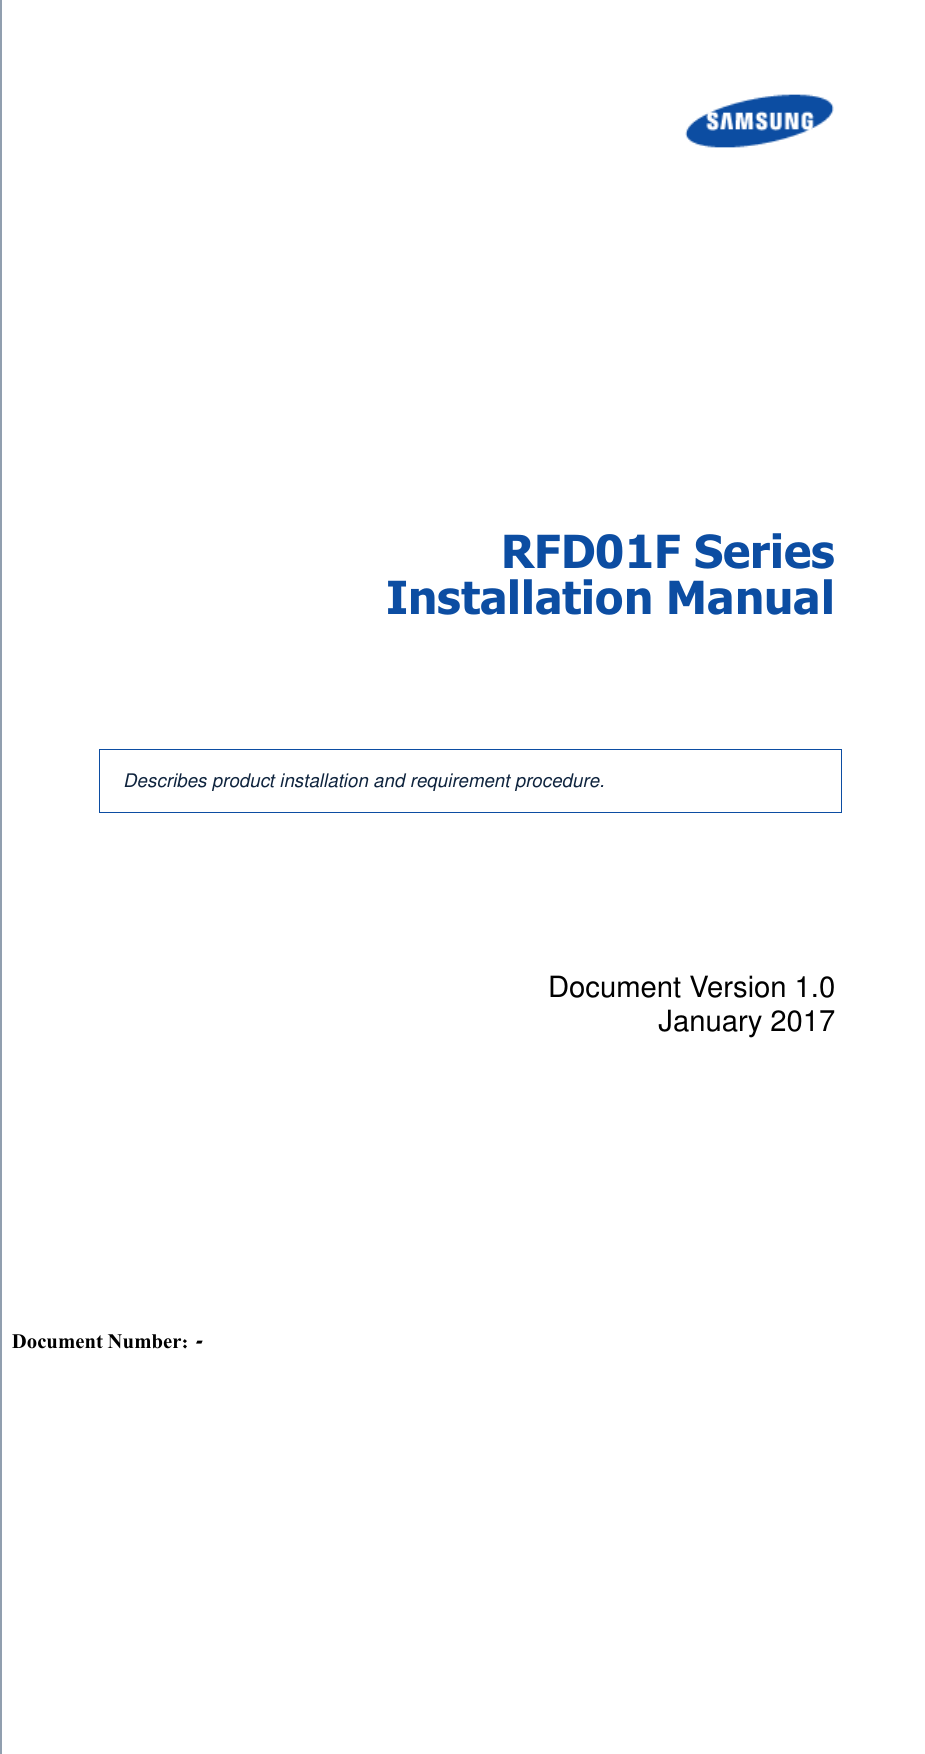     Radio Access Network  RFD01F Series Installation Manual    Describes product installation and requirement procedure. Document Version 1.0 January 2017      Document Number: - 